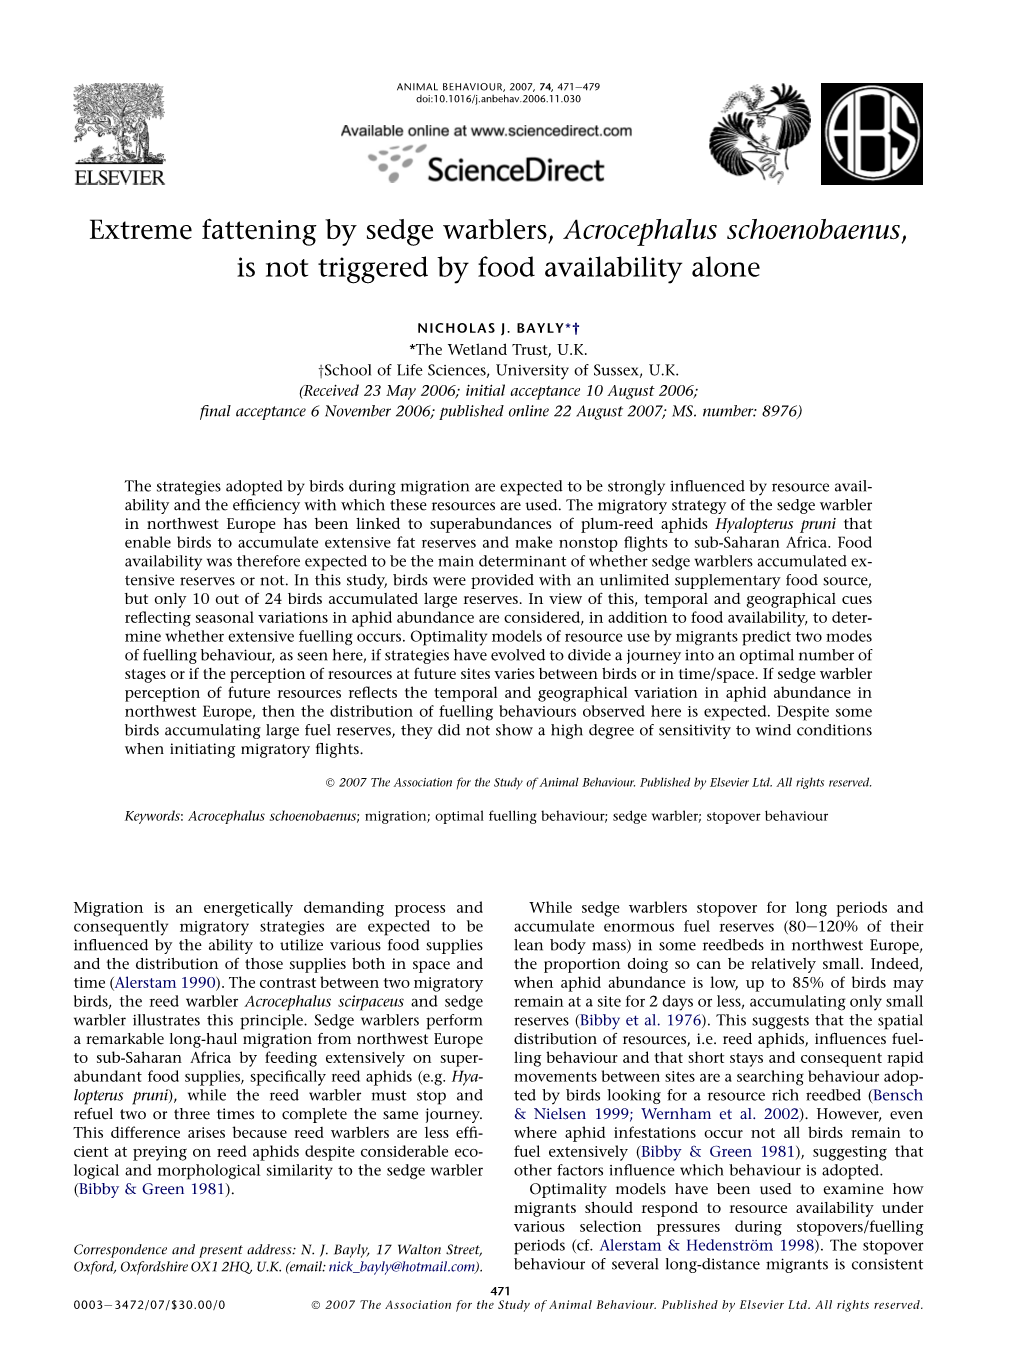 Extreme Fattening by Sedge Warblers, Acrocephalus Schoenobaenus, Is Not Triggered by Food Availability Alone